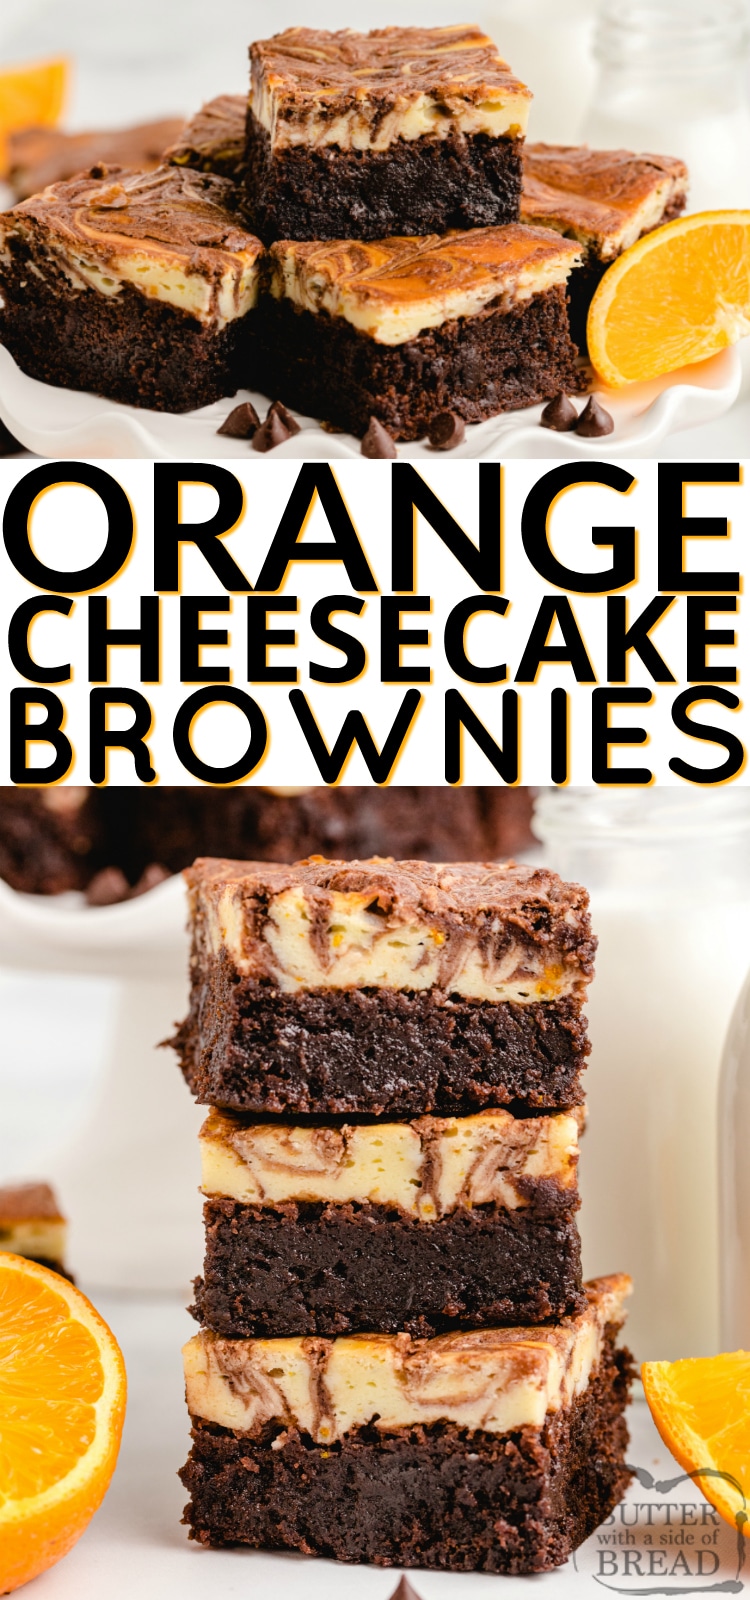 Orange Cheesecake Brownies made with a delicious orange cheesecake layer that is swirled with a simple brownie mix. The orange and chocolate combination is absolutely incredible! 